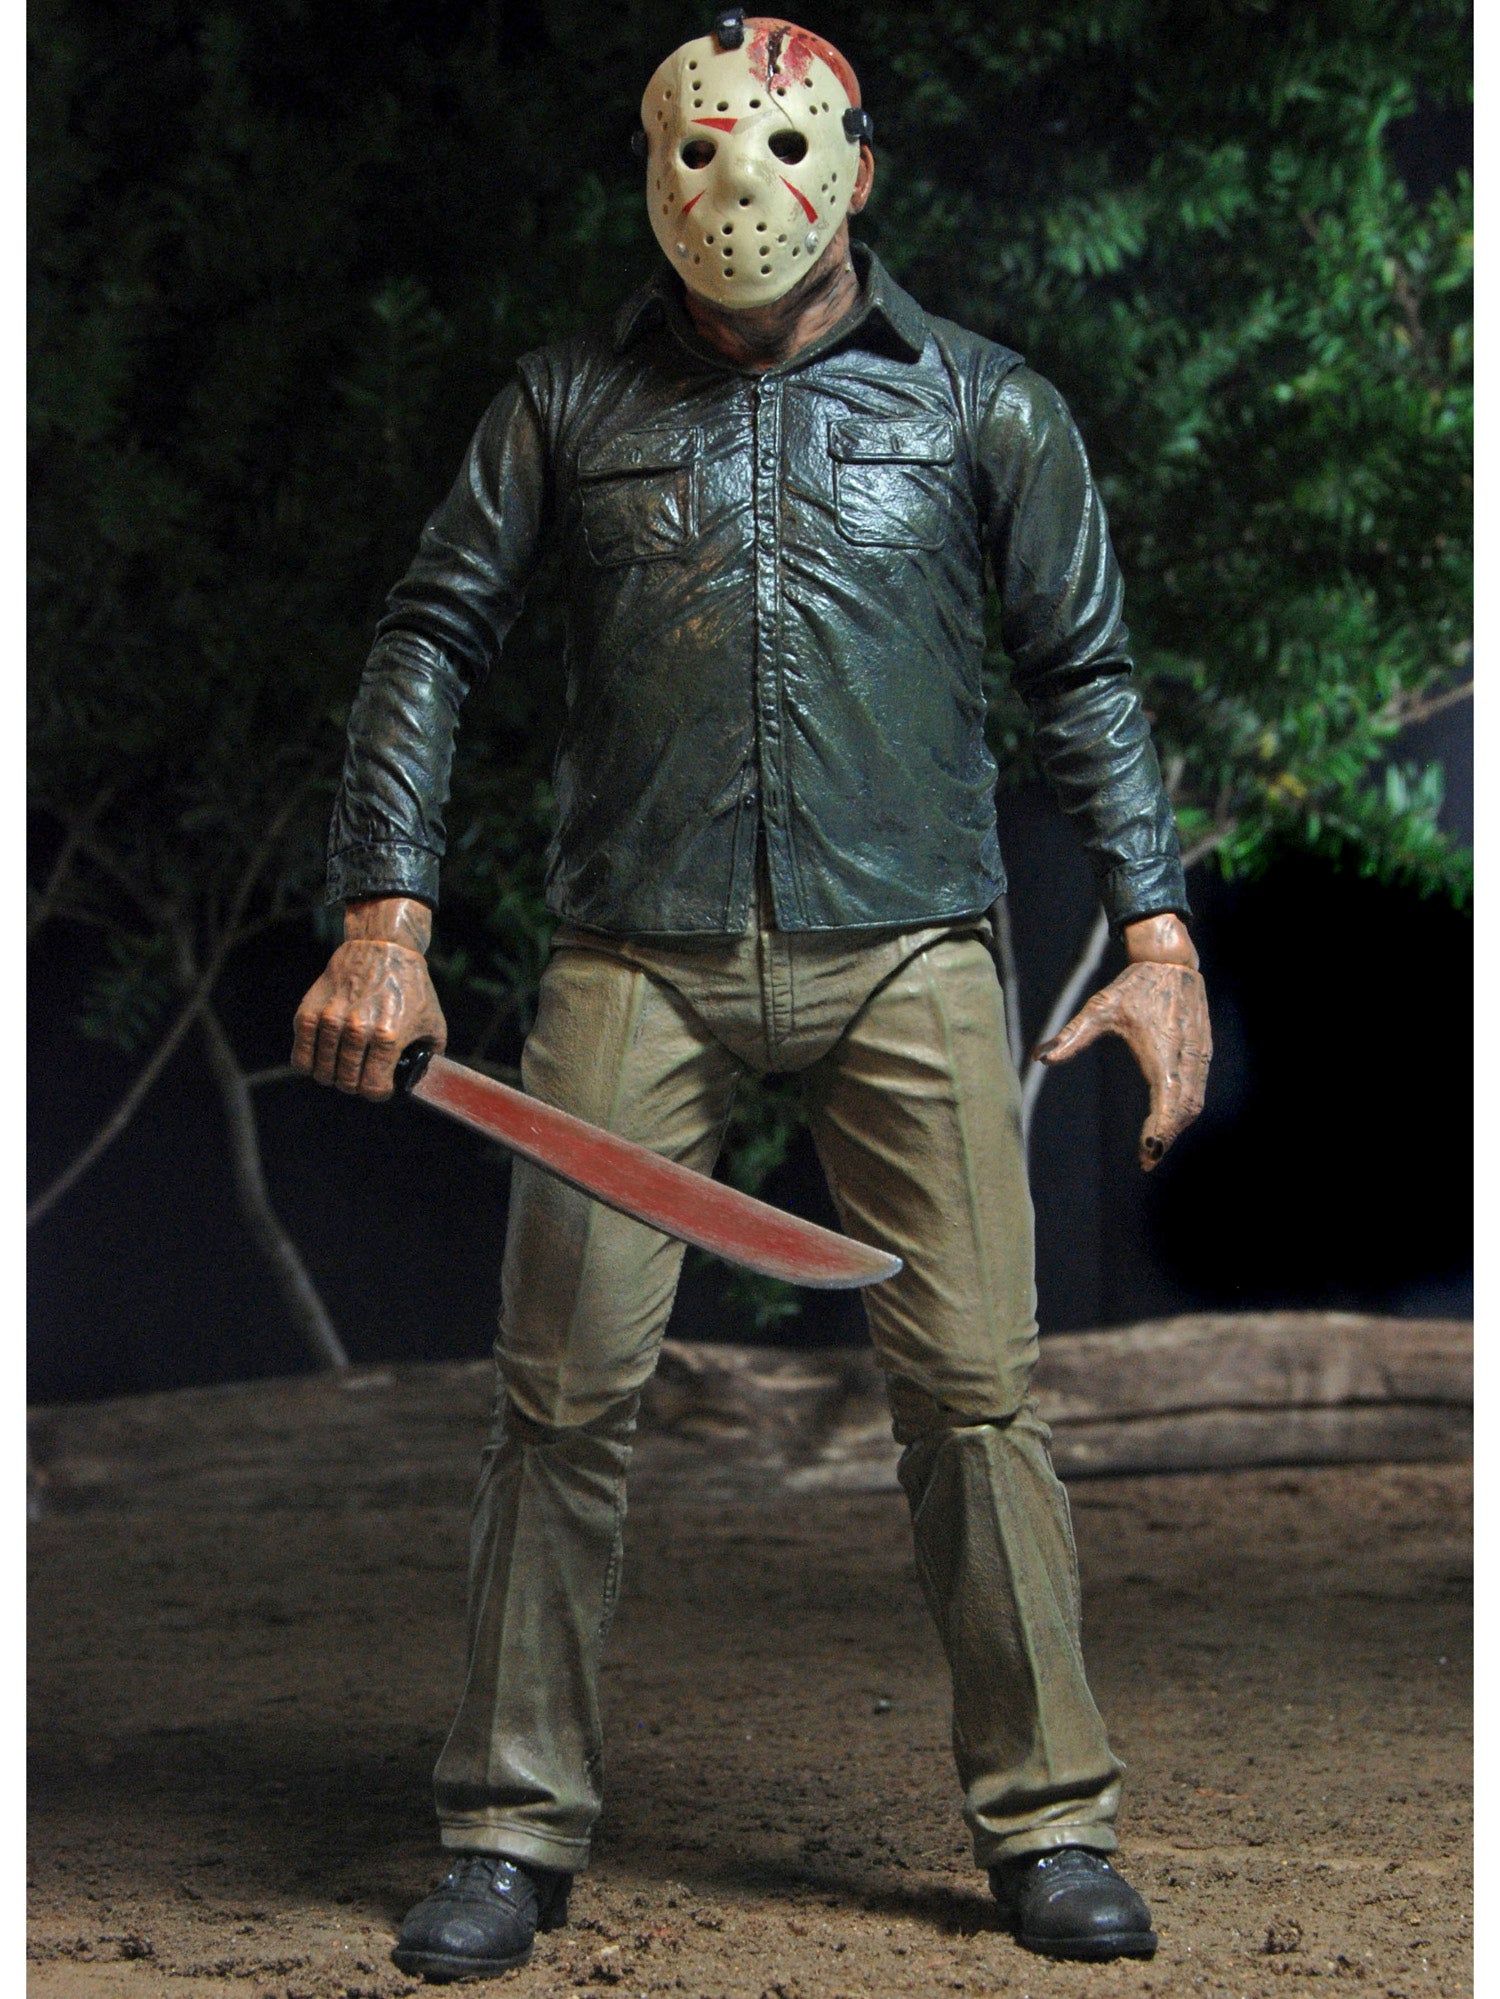 Friday the 13th - 7" Action Figure - Ultimate Part 4 Jason - costumes.com